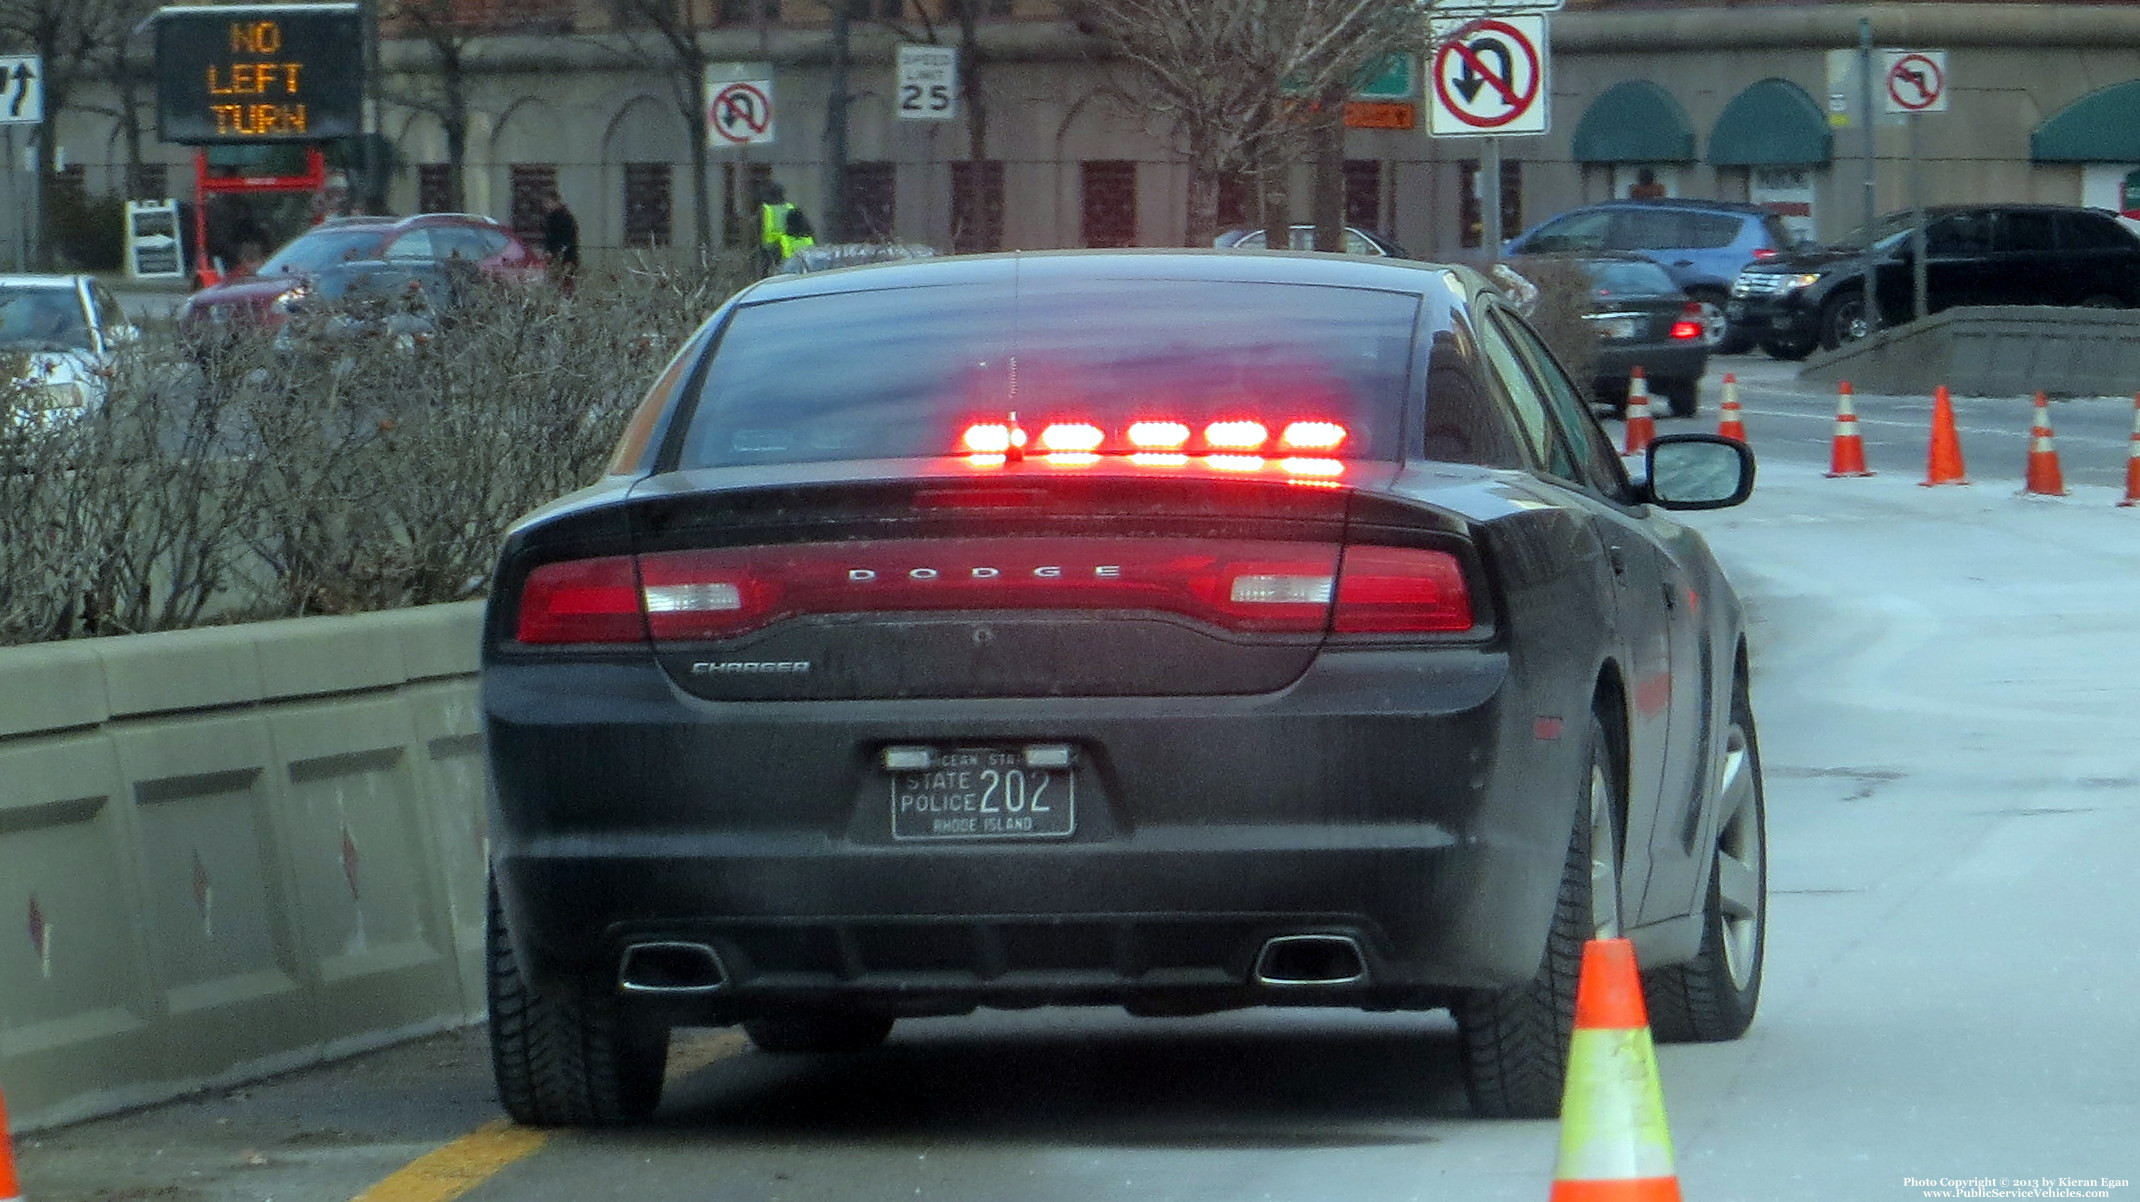 A photo  of Rhode Island State Police
            Cruiser 202, a 2013 Dodge Charger             taken by Kieran Egan